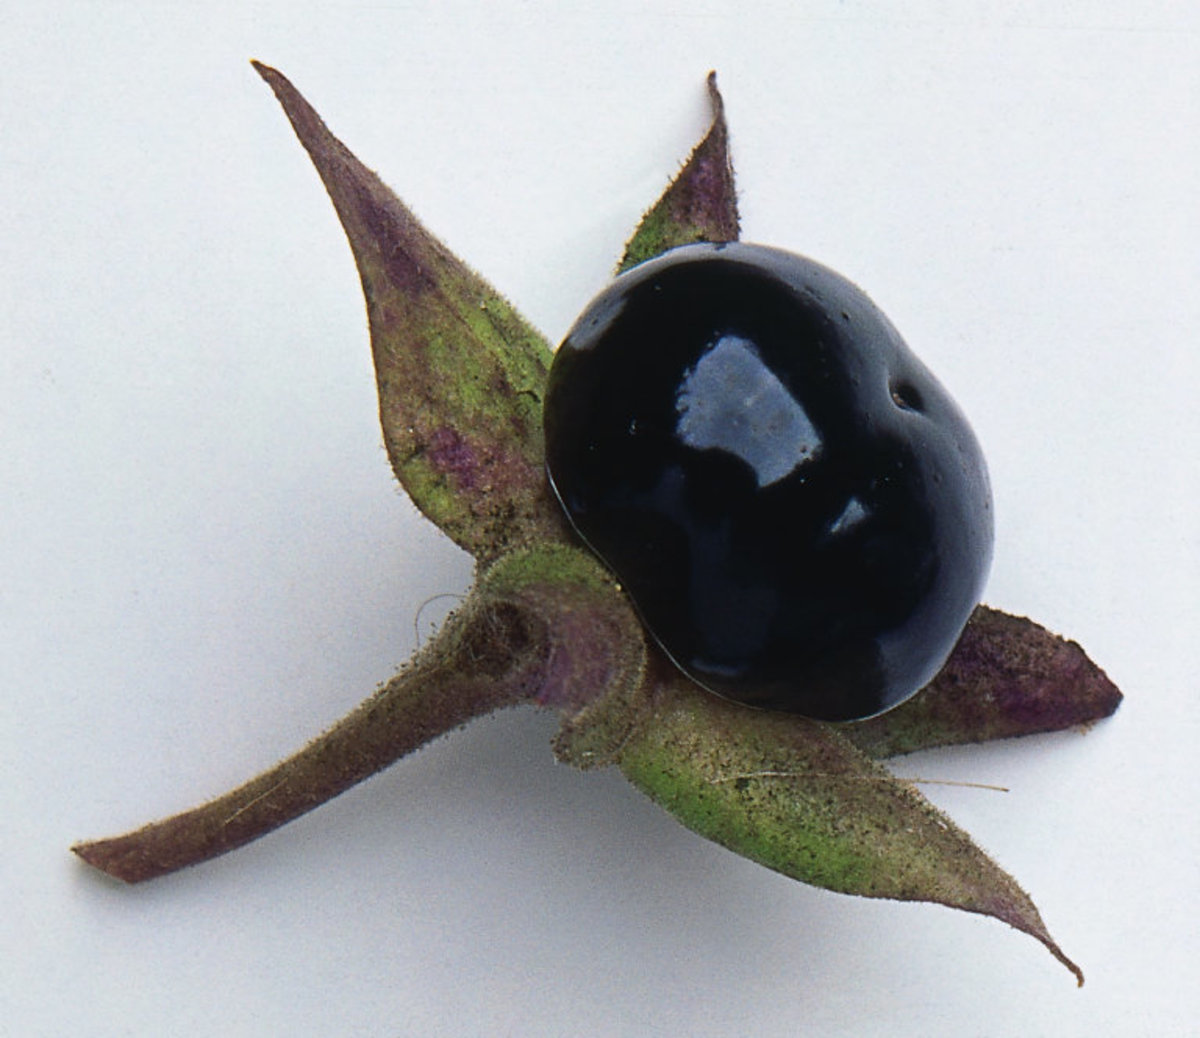 Black Nightshade berry used to make the poison Belladonna.